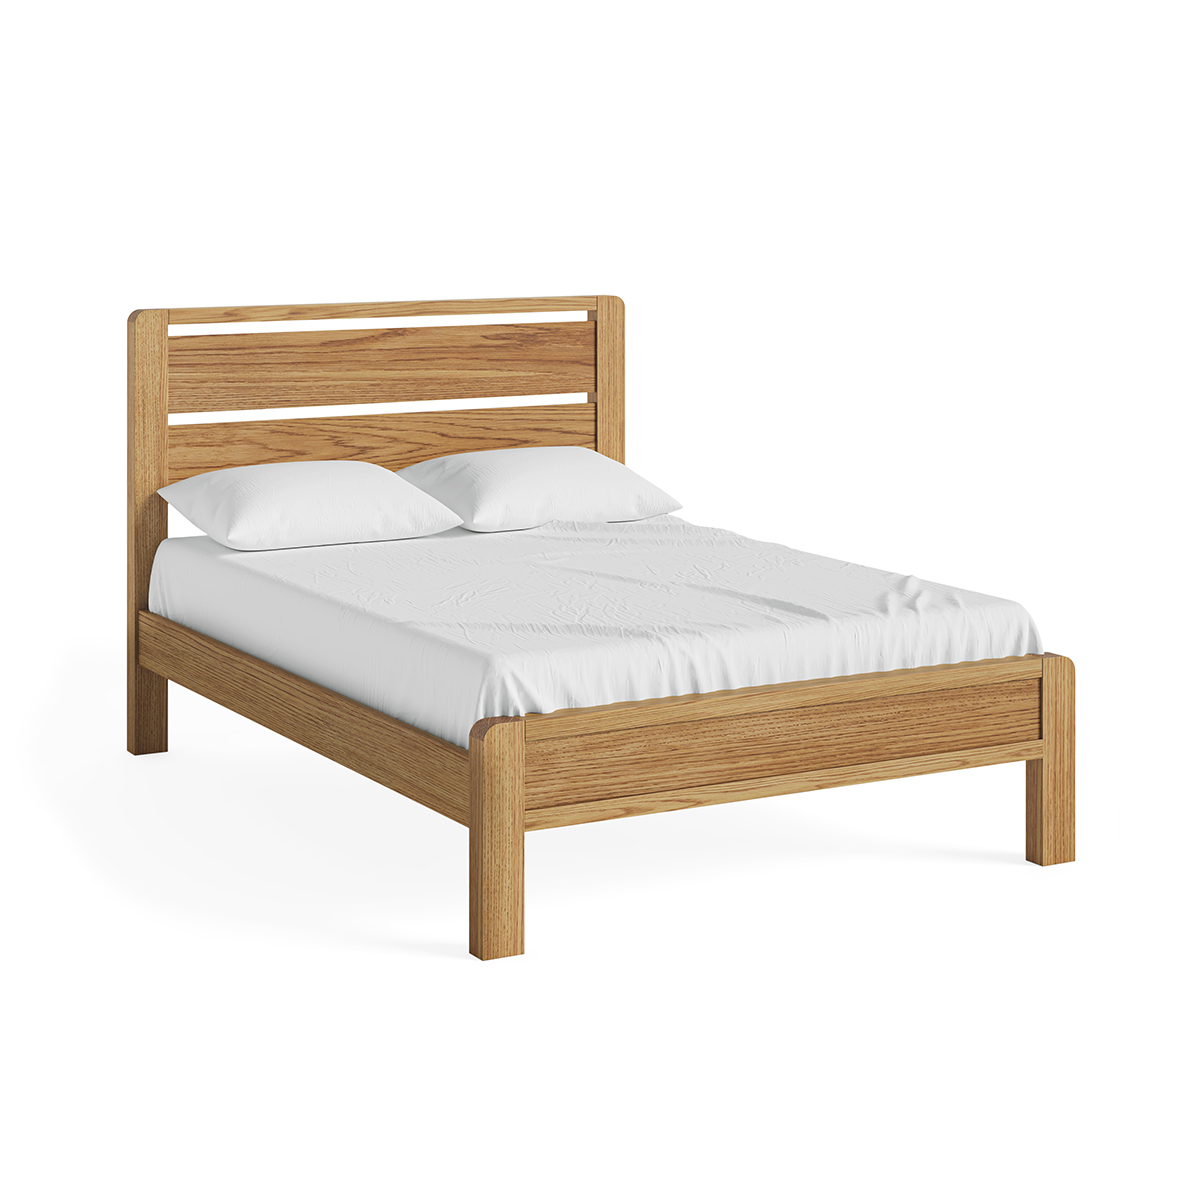 Edson 4ft6 Double Bed Frame